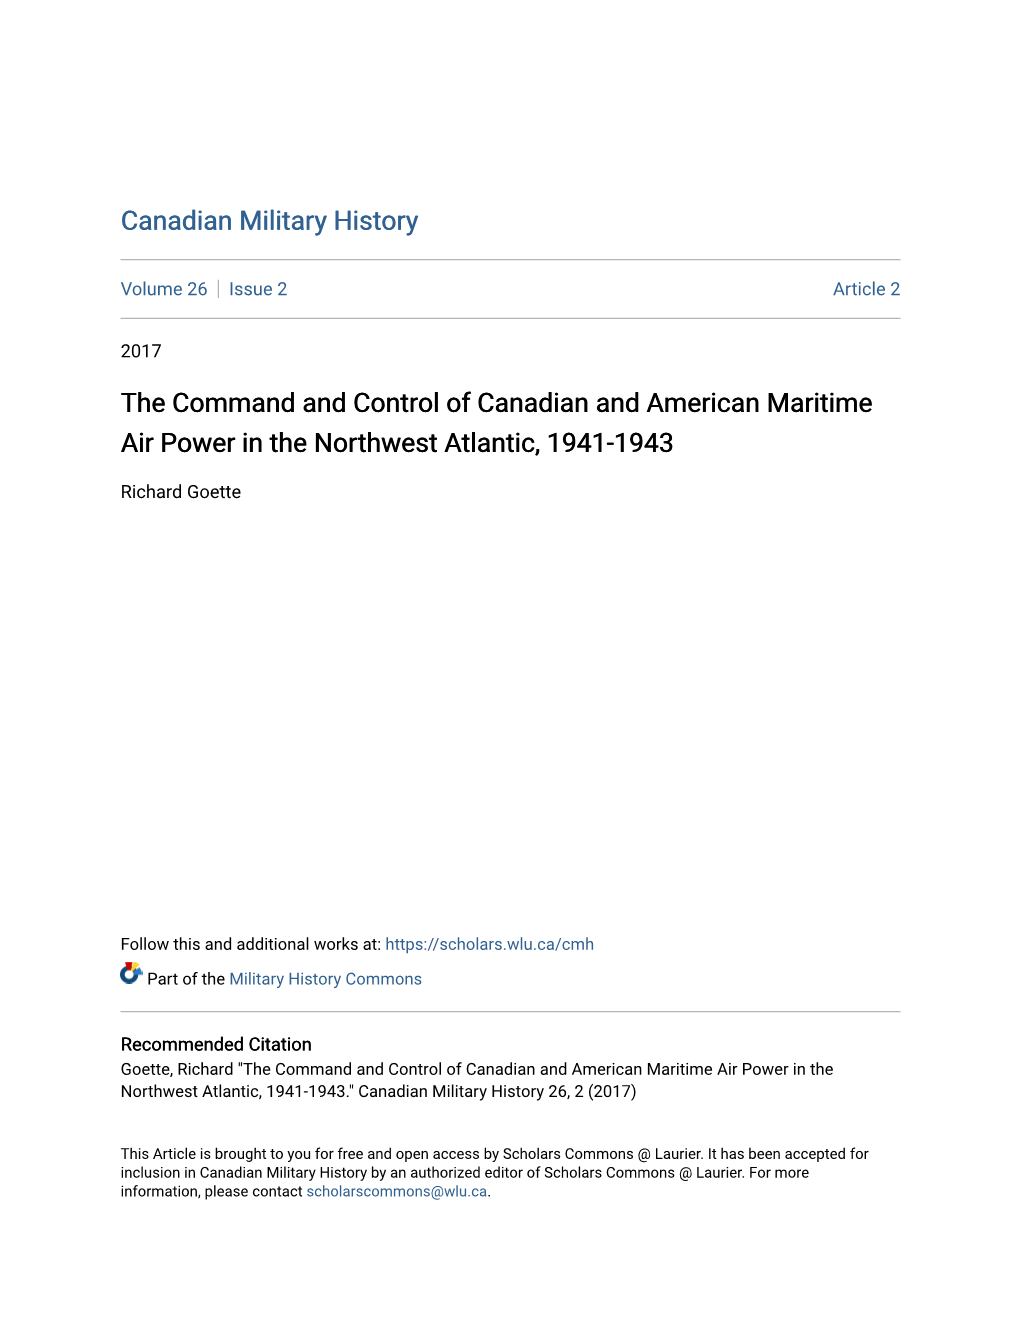 The Command and Control of Canadian and American Maritime Air Power in the Northwest Atlantic, 1941-1943